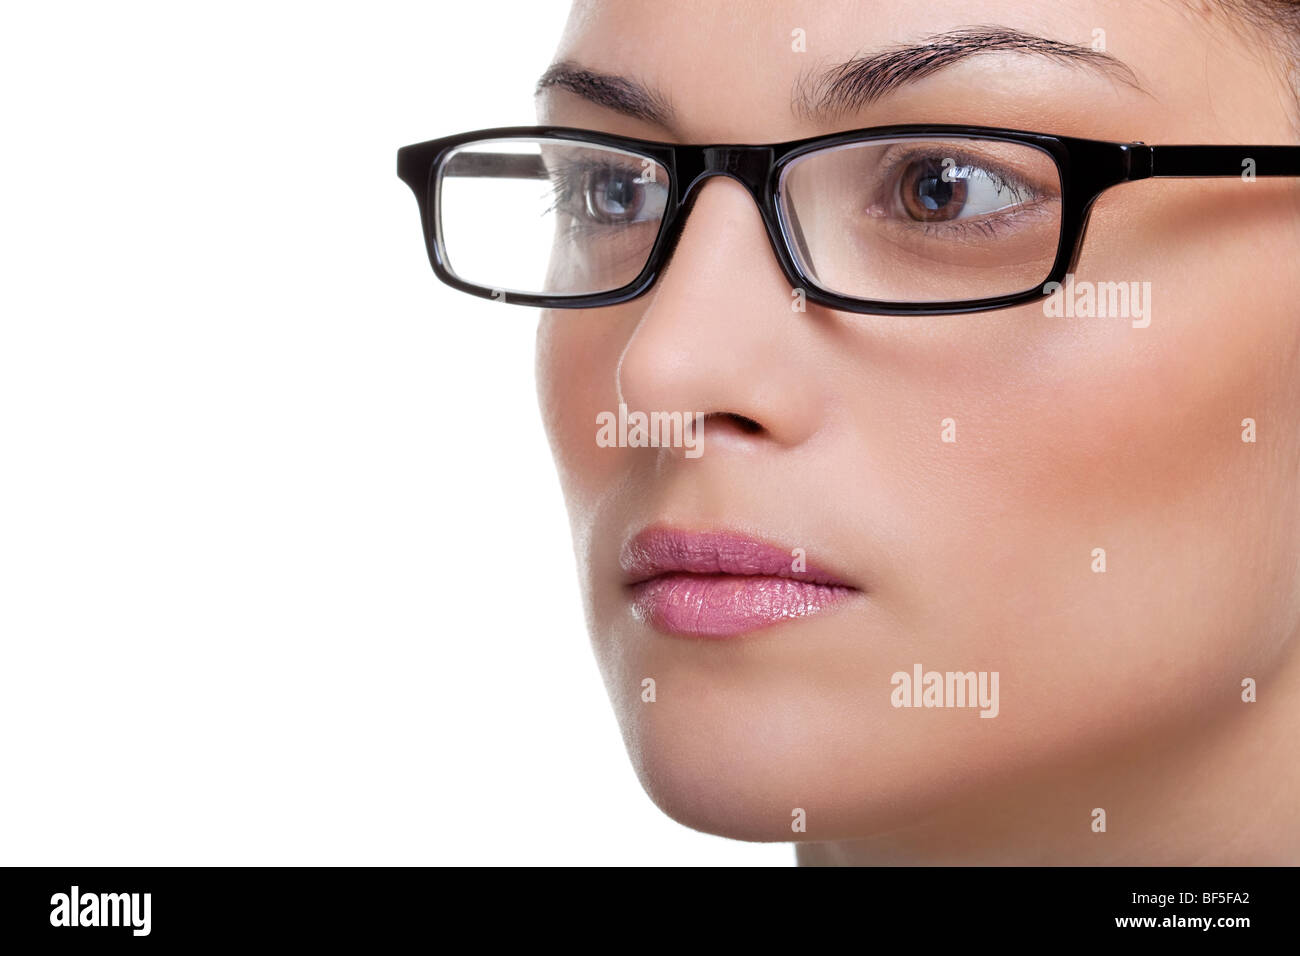 Close up of a woman wearing black rimmed spectacles Stock Photo